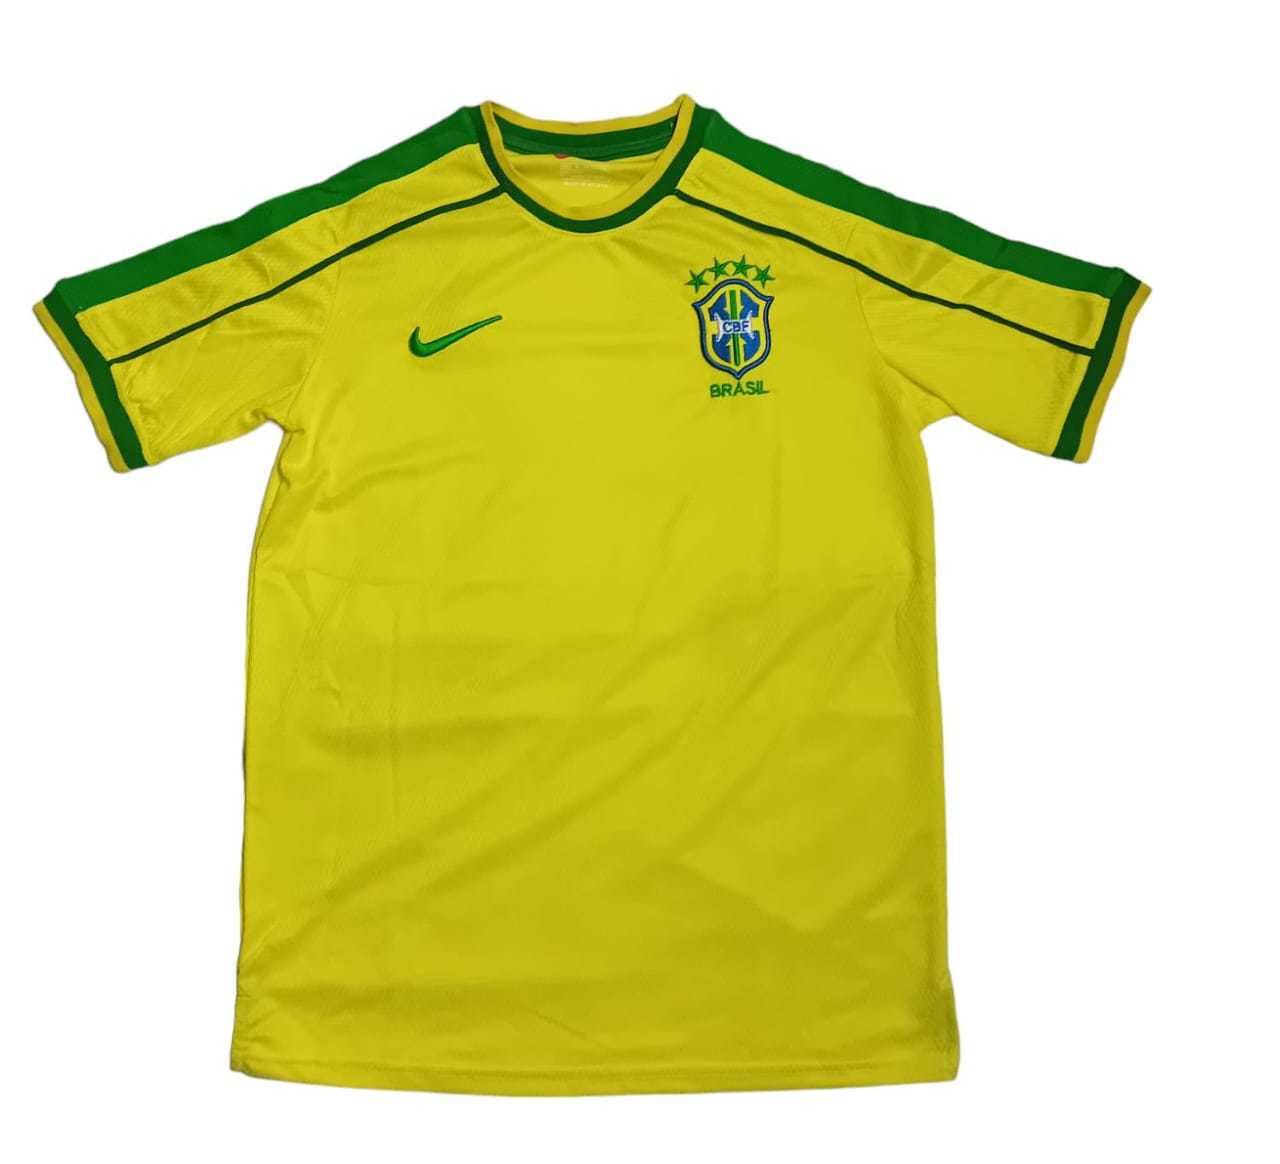 Brazil 1998 Home Jersey/ High quality /Very LIMITED EDITION - $73.00